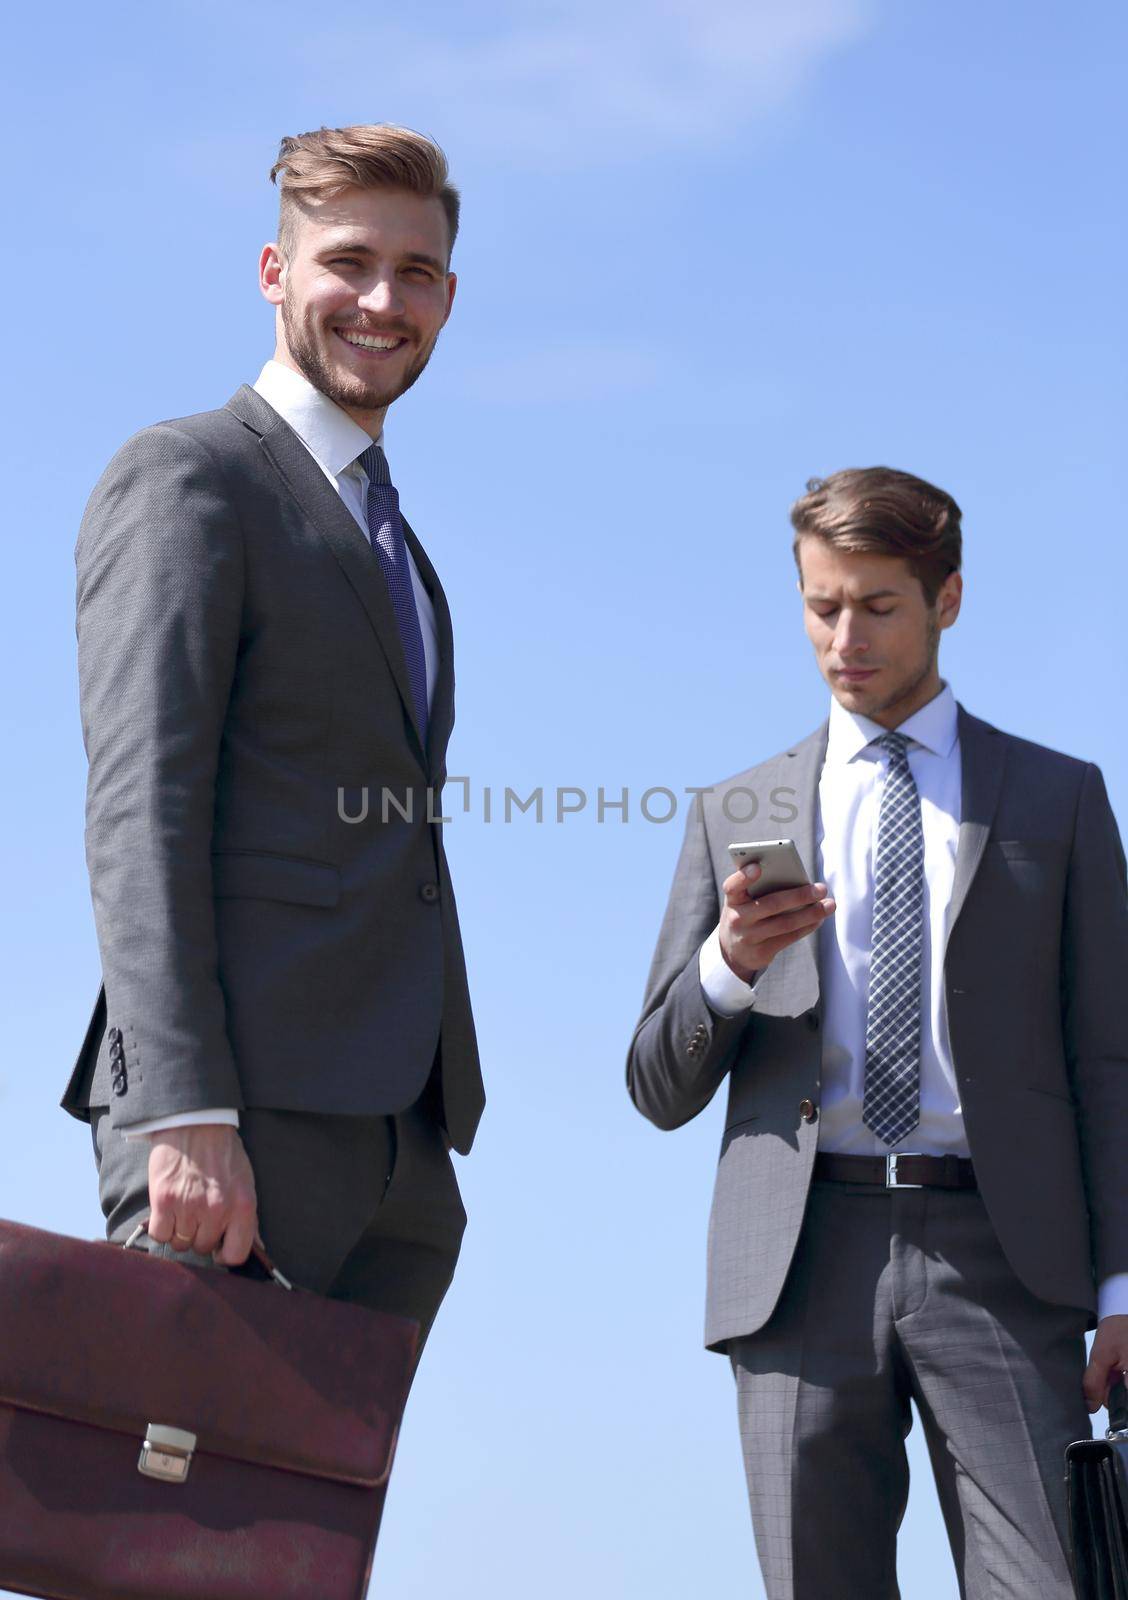 two modern business people standing on the street by asdf